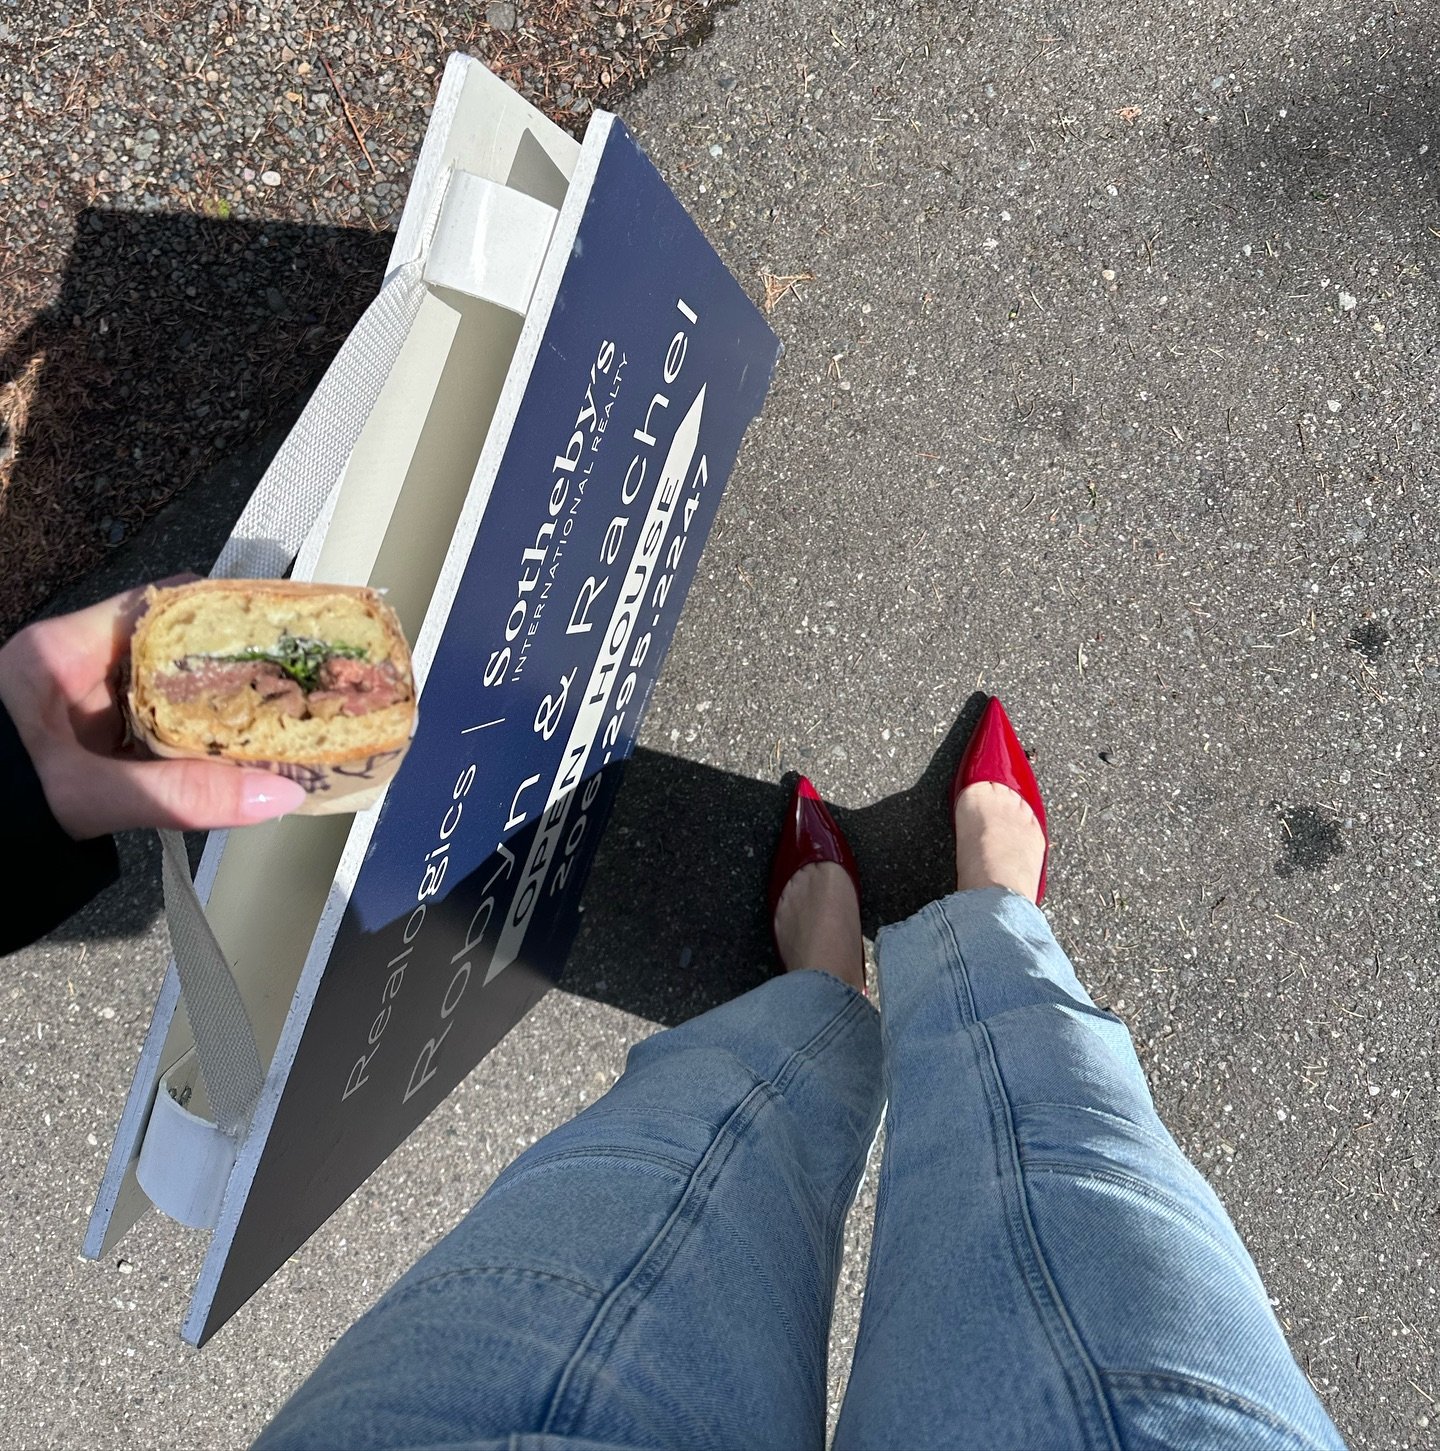 In our vetted experience, these are the things you should carry on you at all times as an agent! 3 of them pictured here ➡️ a snack, your signs &amp; extra shoes. Here&rsquo;s the 101! 

&bull; 2 pairs of shoes! 1 - comfy pair for function 2 - the pr